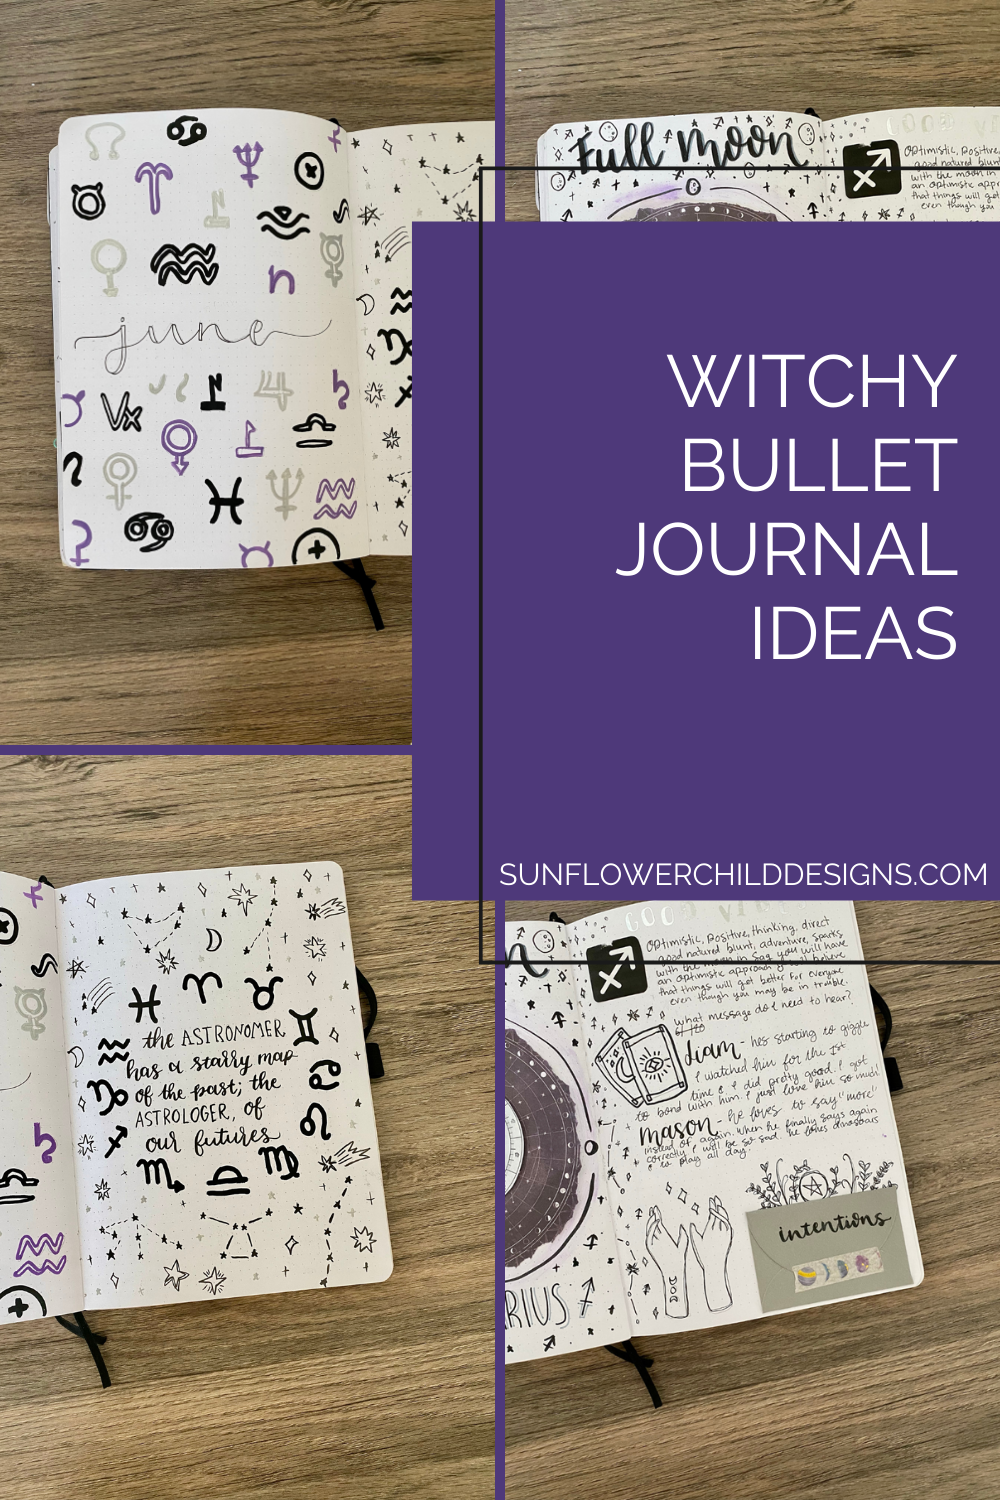 Guided Self Care Witchy Bullet Journal 365 days — Sunflower Child Designs